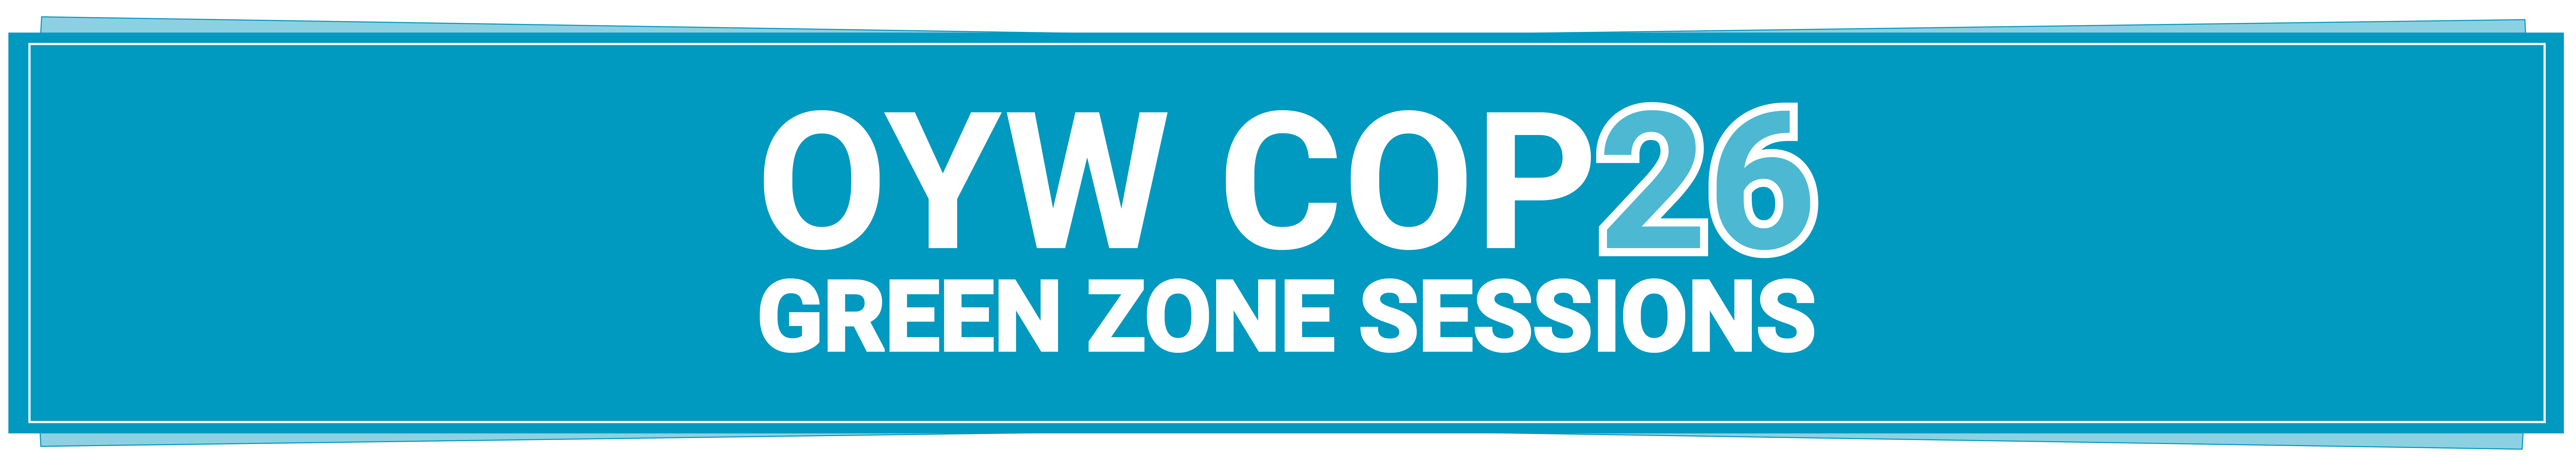 Green Zone Sessions - COP26